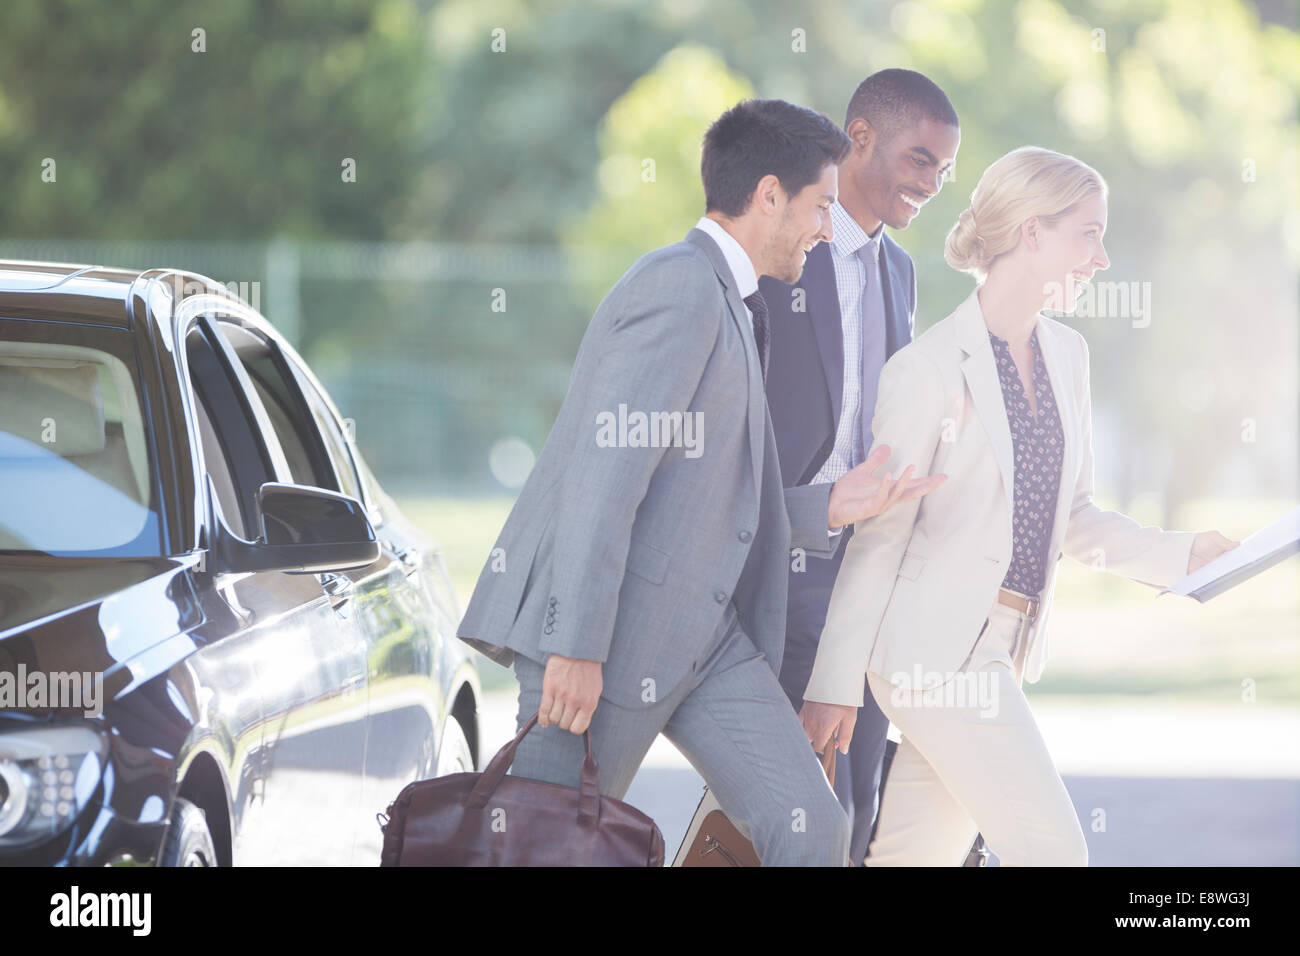 Business people walking together on city street Stock Photo